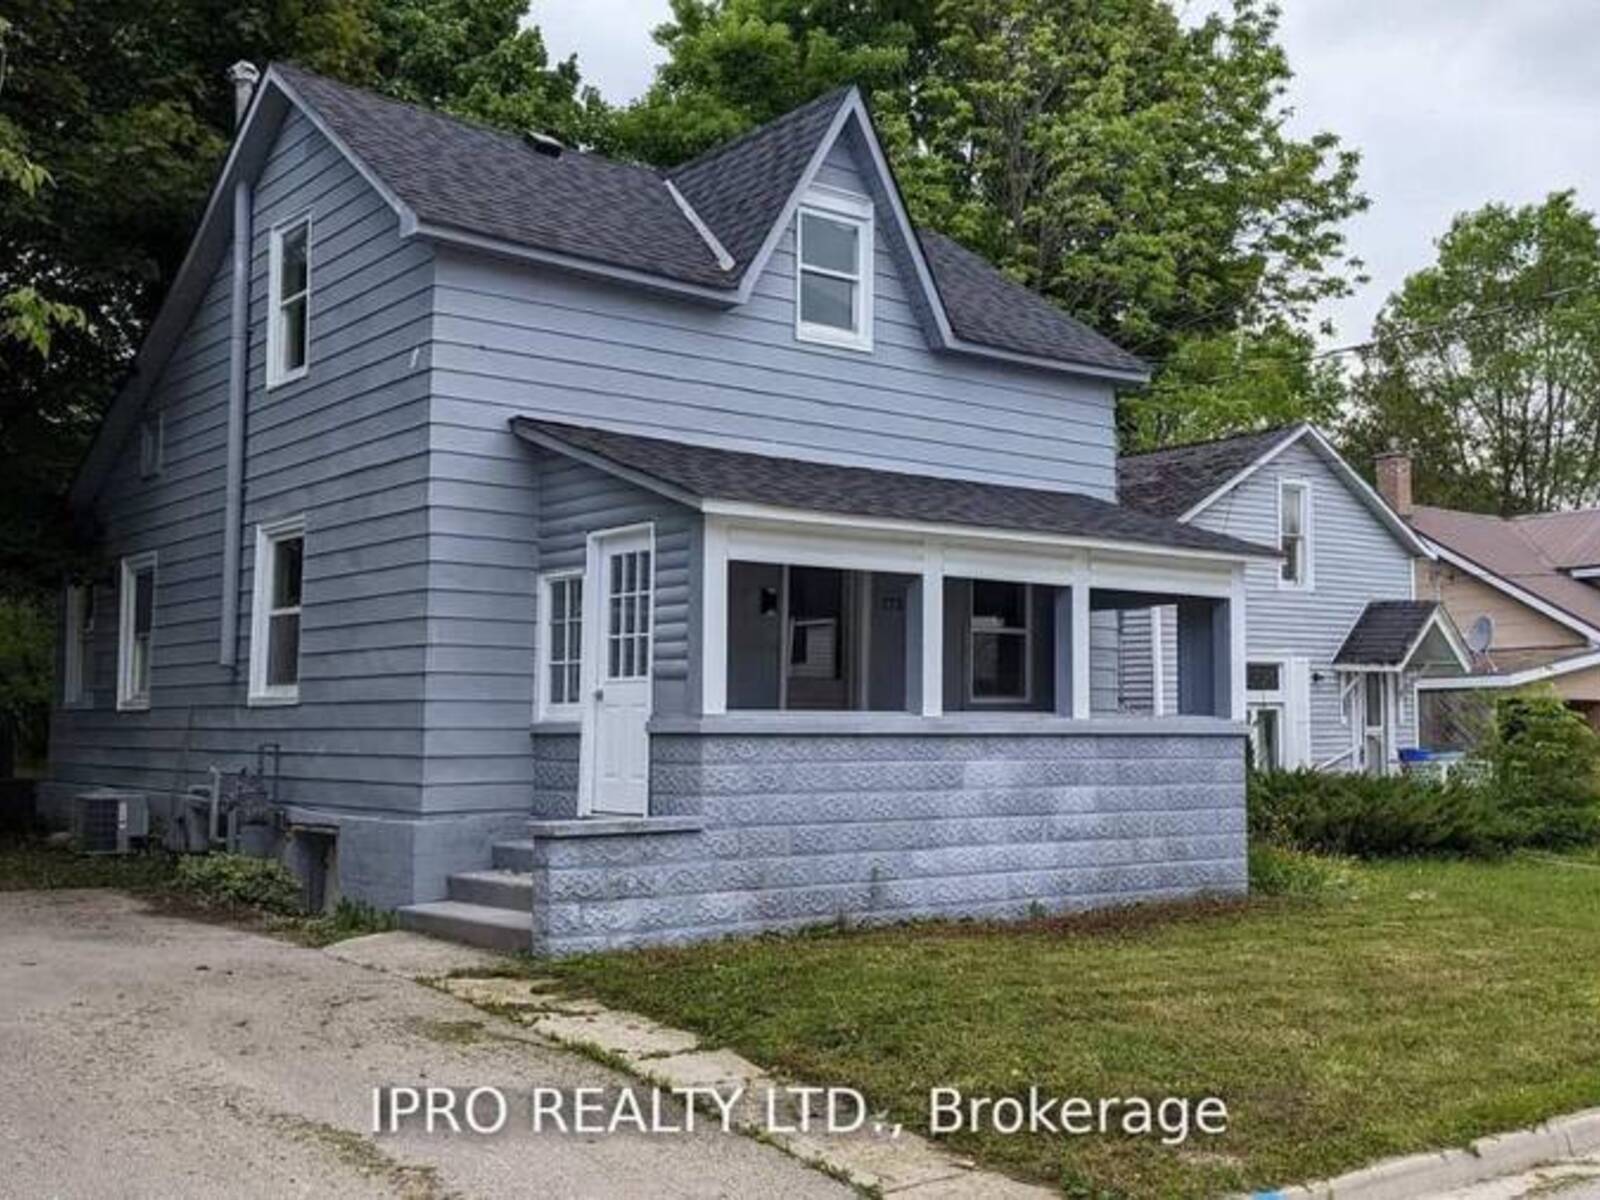 172 HENRY ST, Meaford, Ontario N4L 1E1